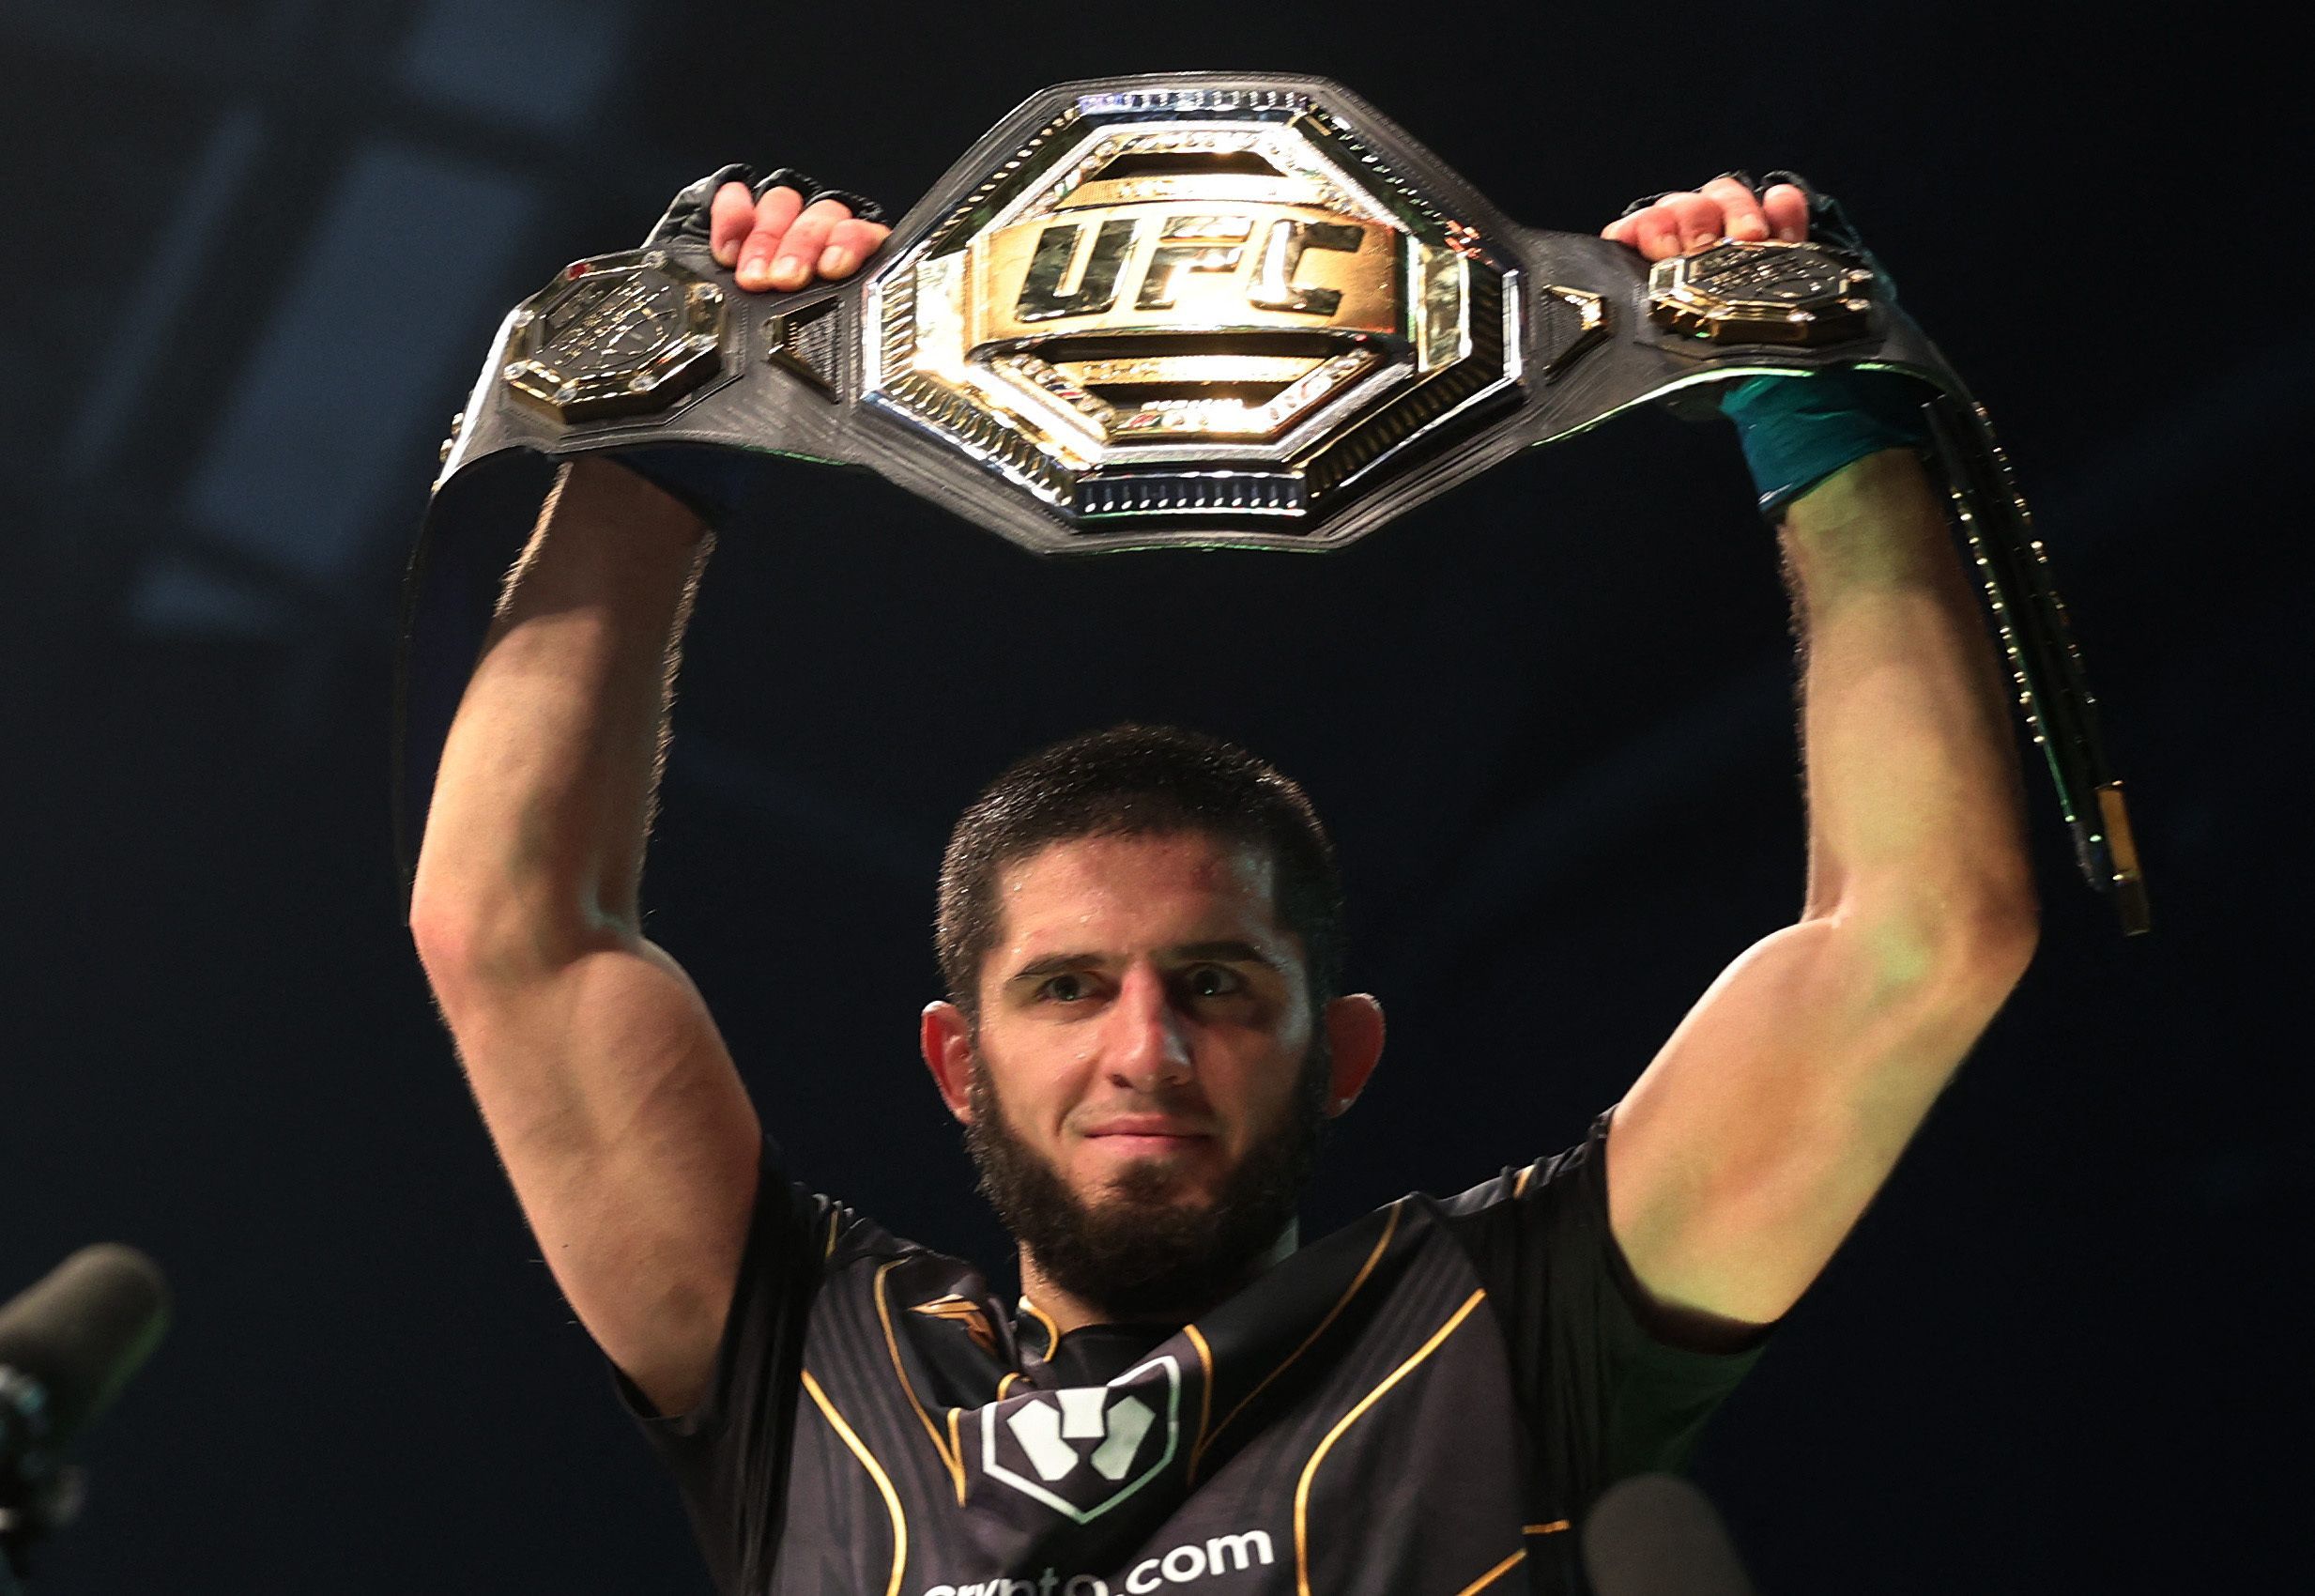 Islam Makhachev is the current UFC lightweight champion